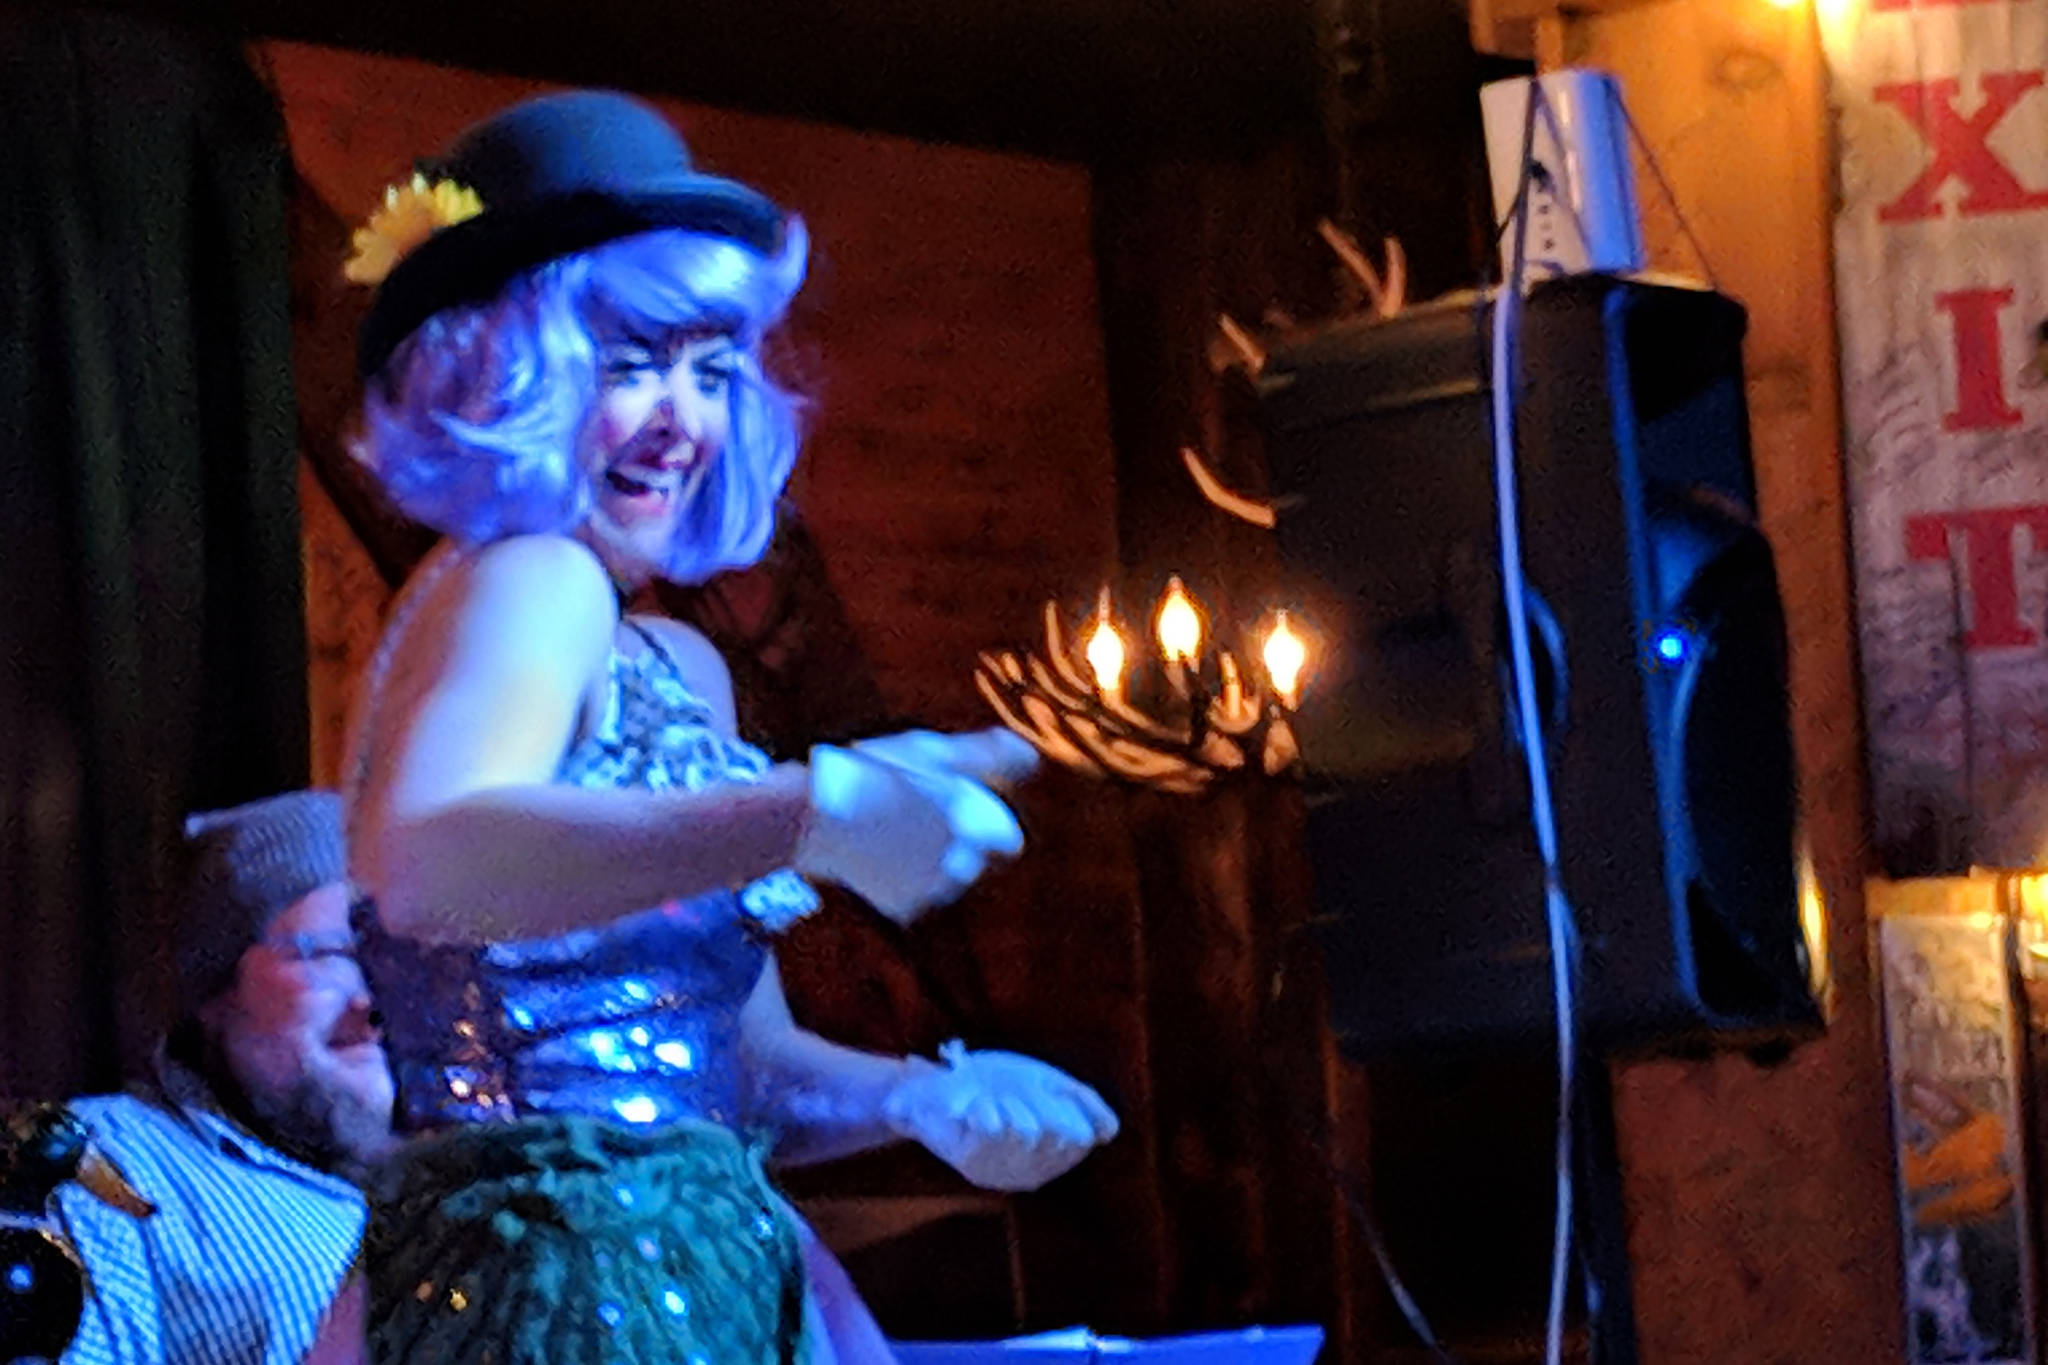 Anya Absten mimes pulling a rope during Nude & Rude Revue burlesque troupe’s Thursday night show. (Ben Hohenstatt | Capital City Weekly)